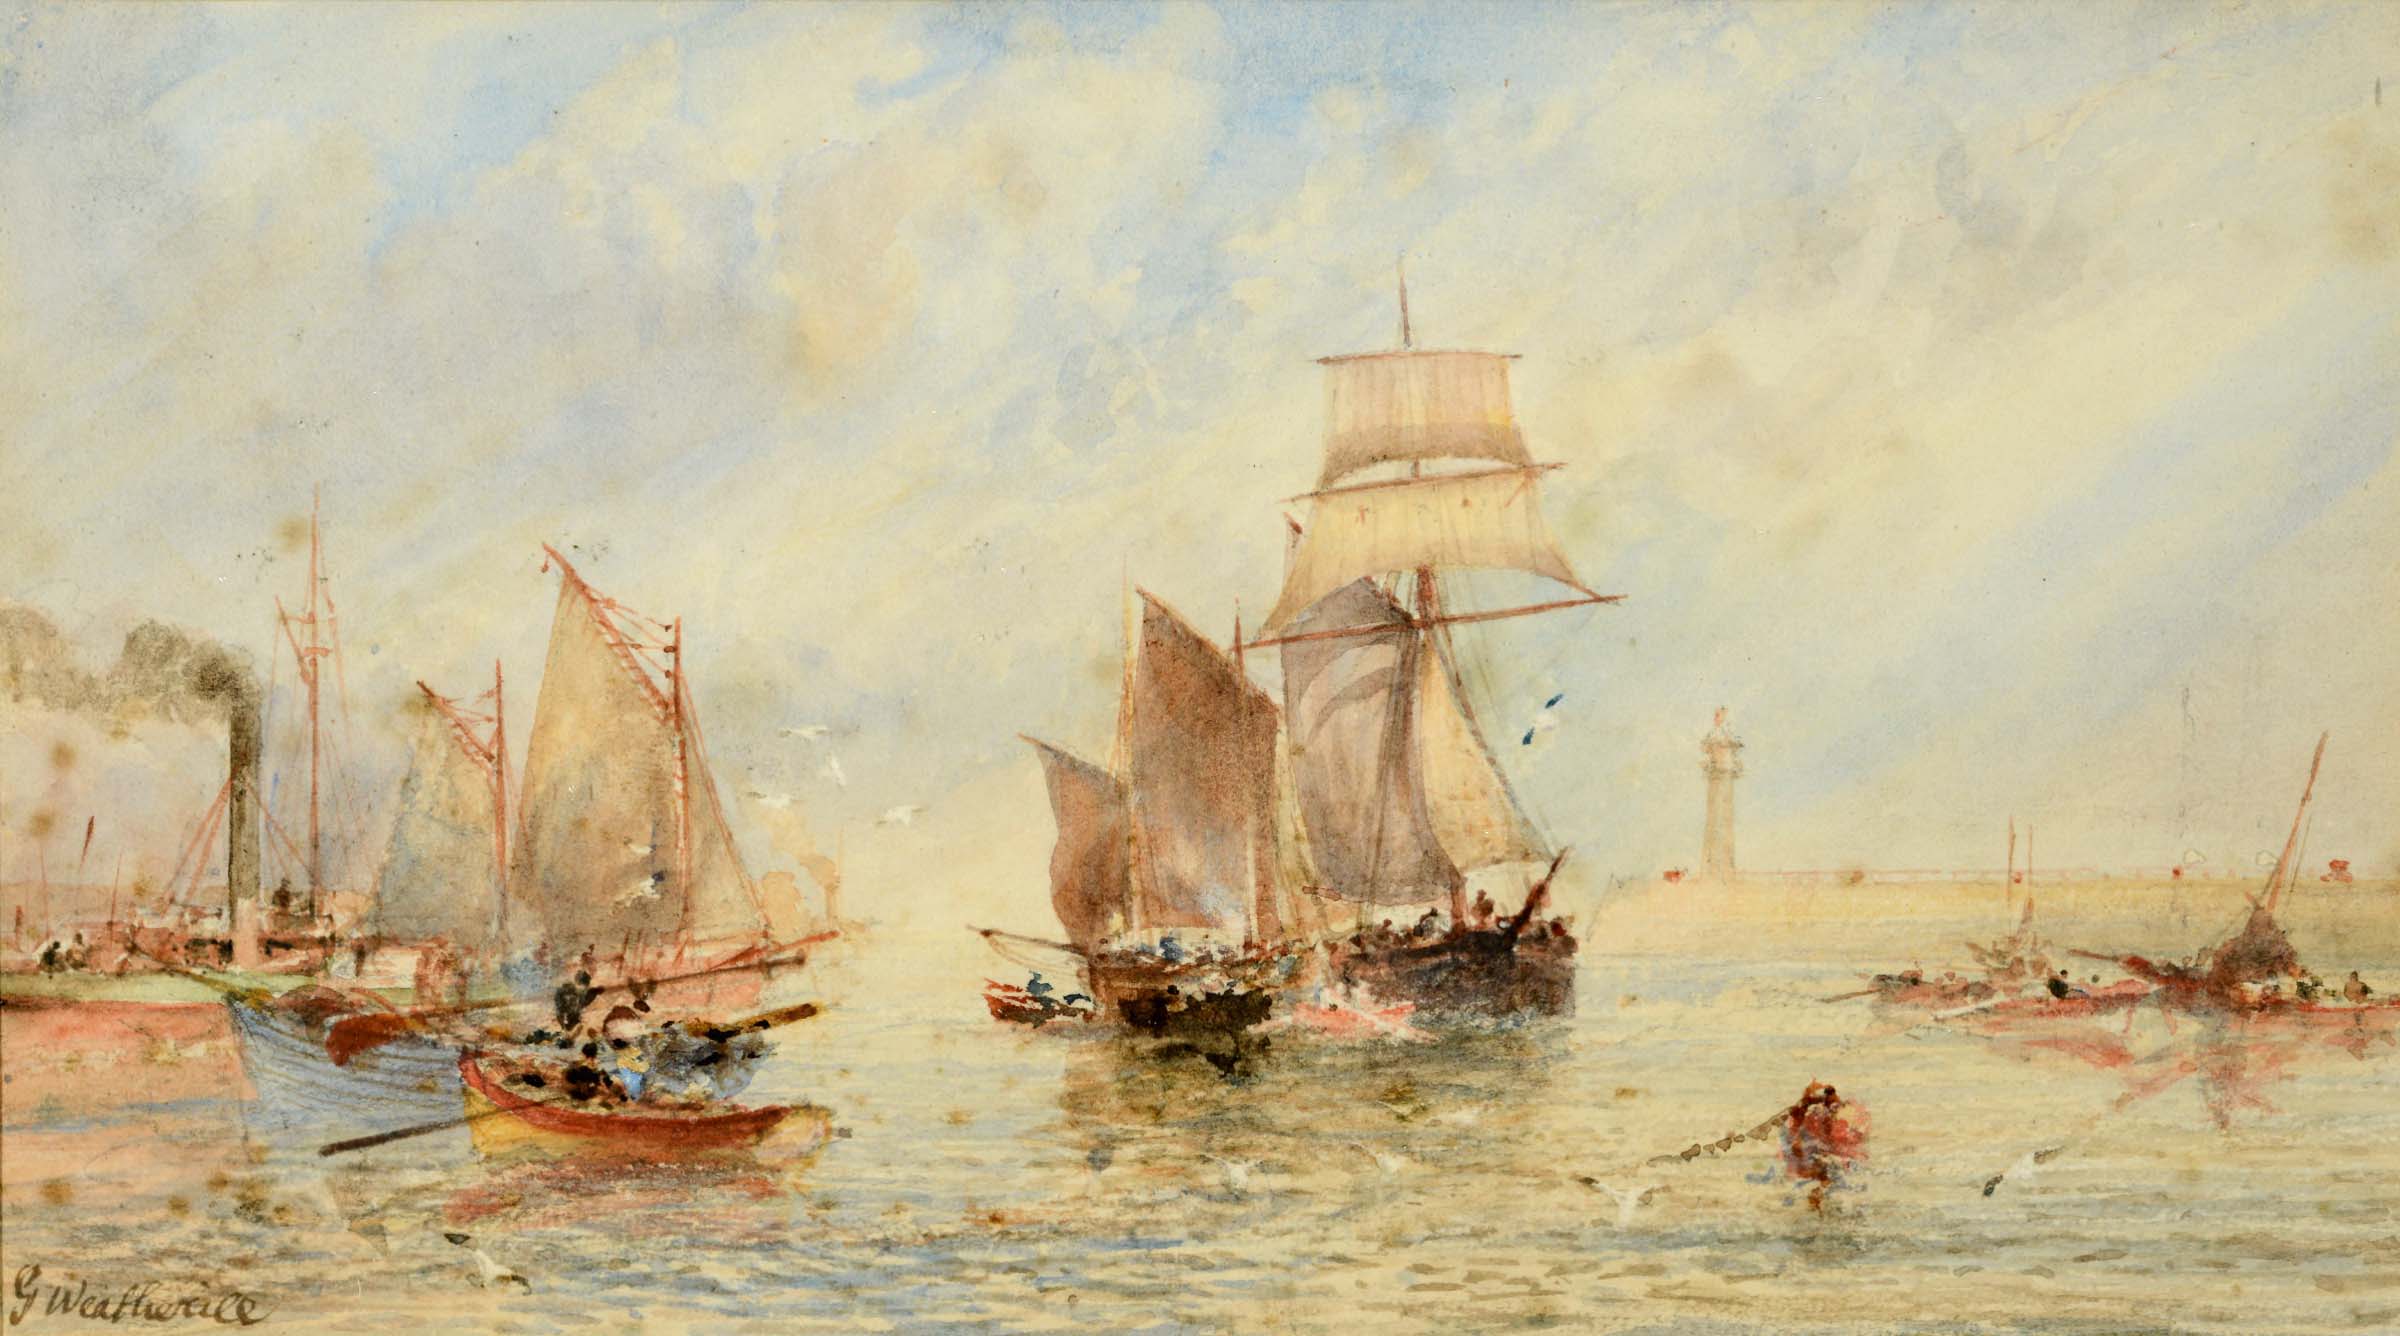 GEORGE WEATHERILL (1810-1890) FISHING BOATS, WHITBY Signed, watercolour 10.5 x 19.5cm. ++ Some